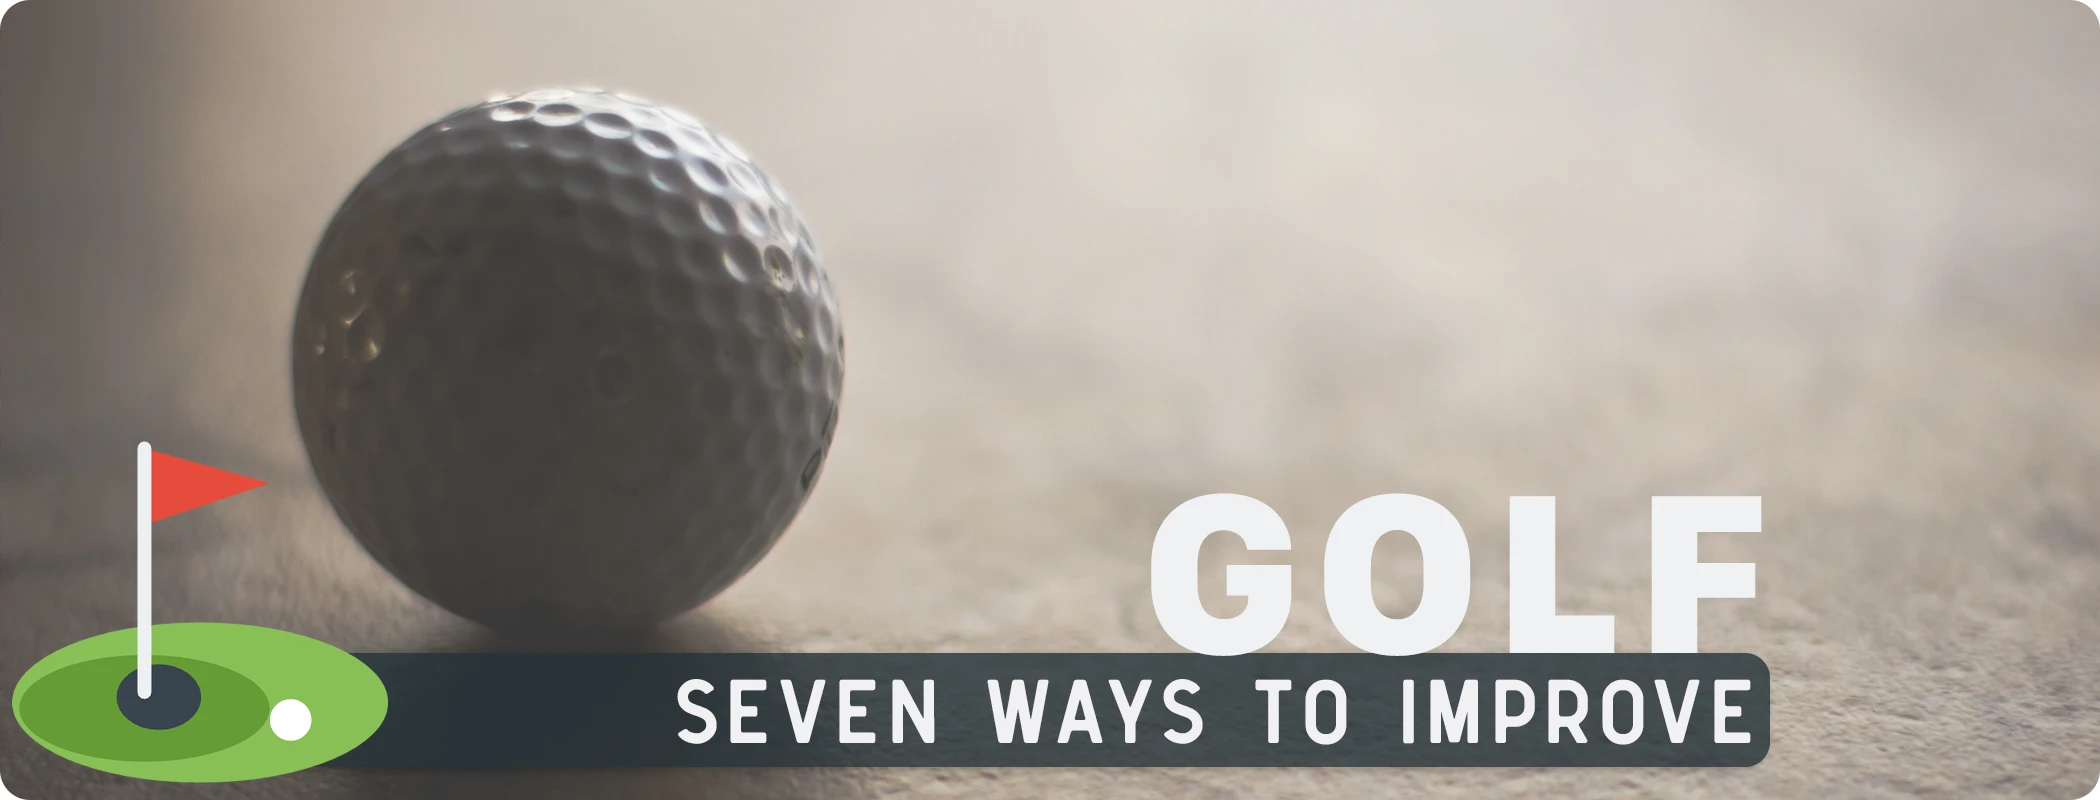 Golf - Seven Steps To Improve Your Game